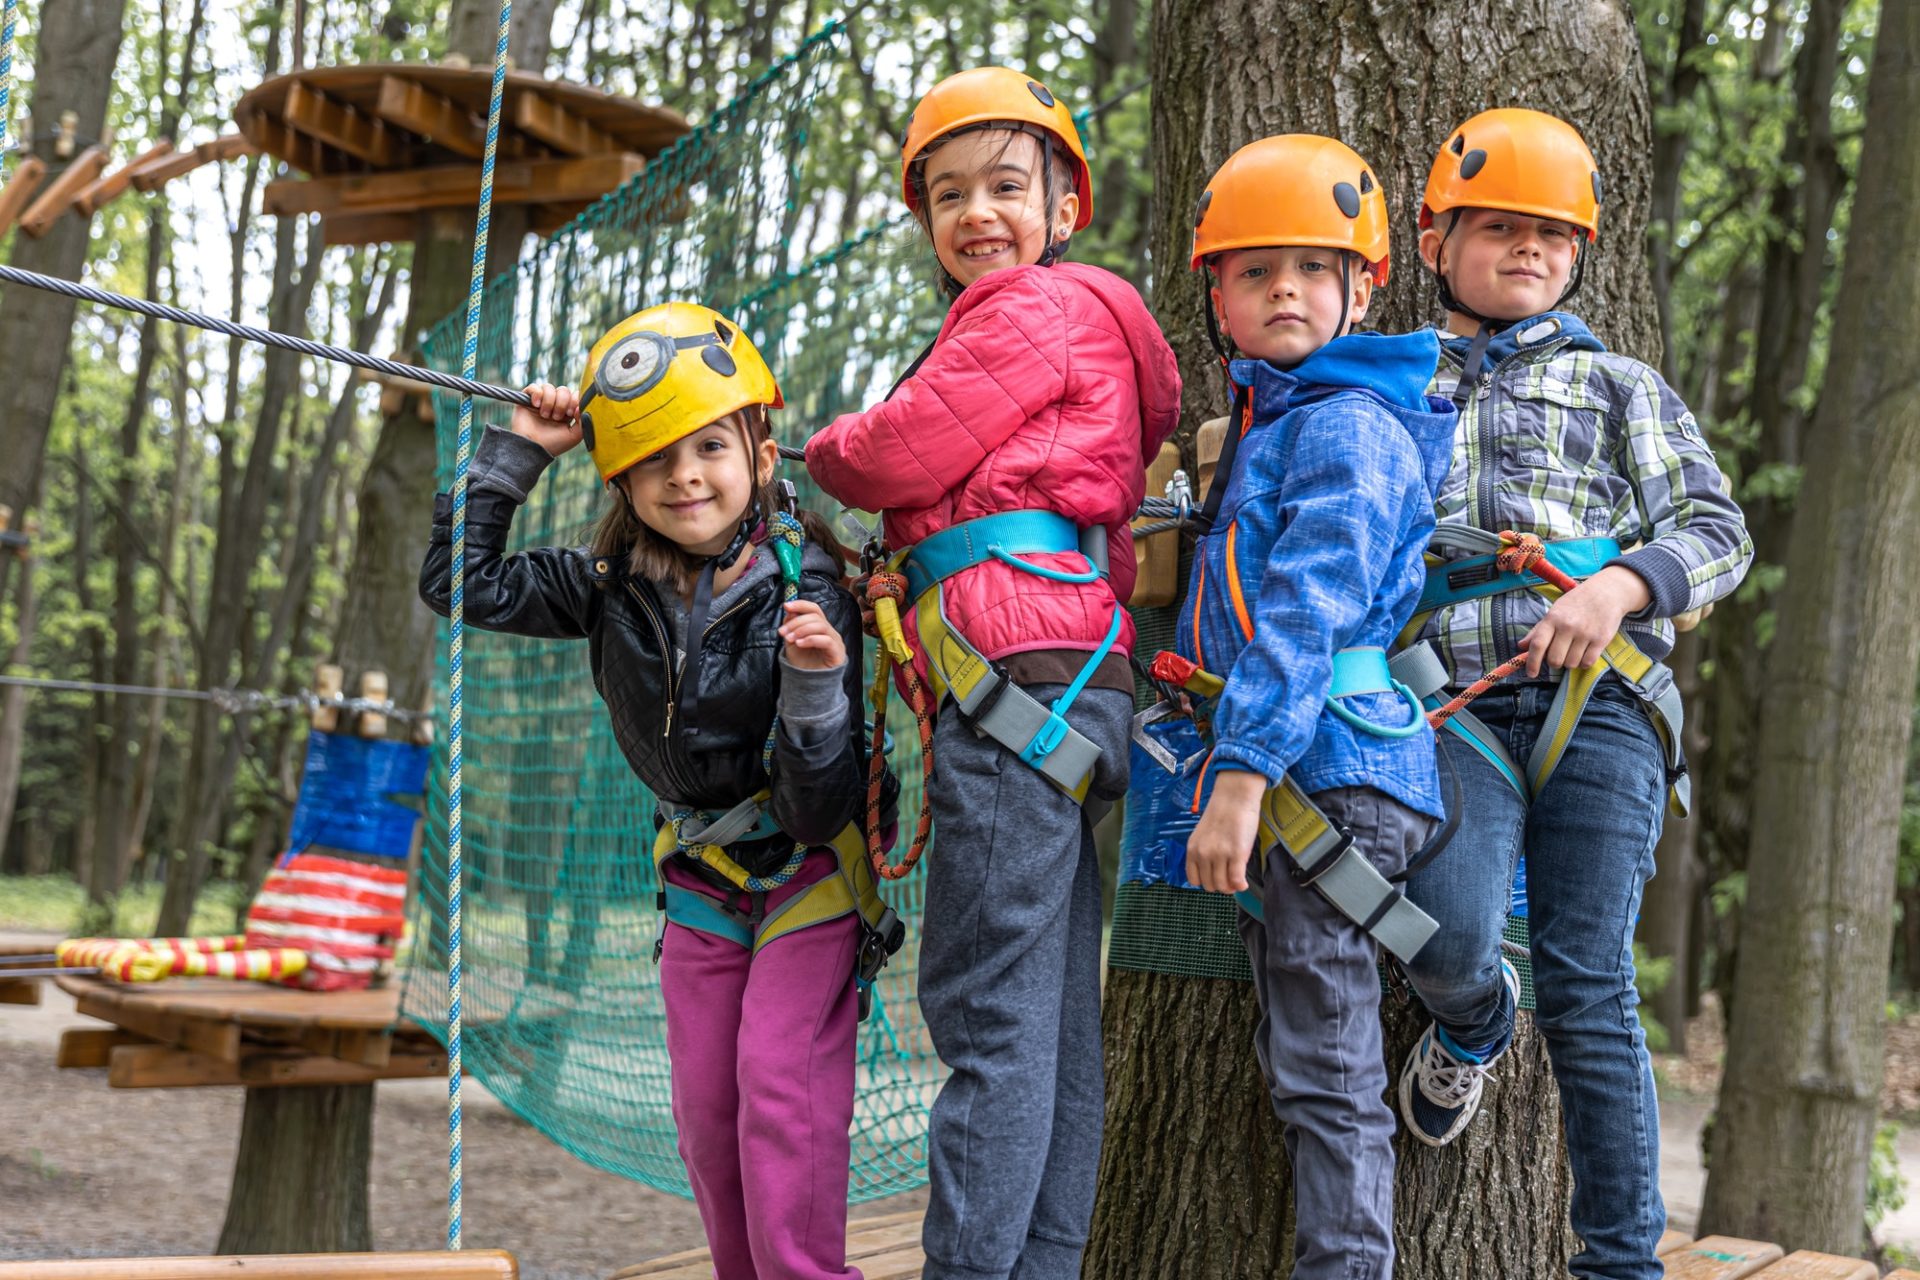 Children in a climbing park in protective helmets climb the ropes.